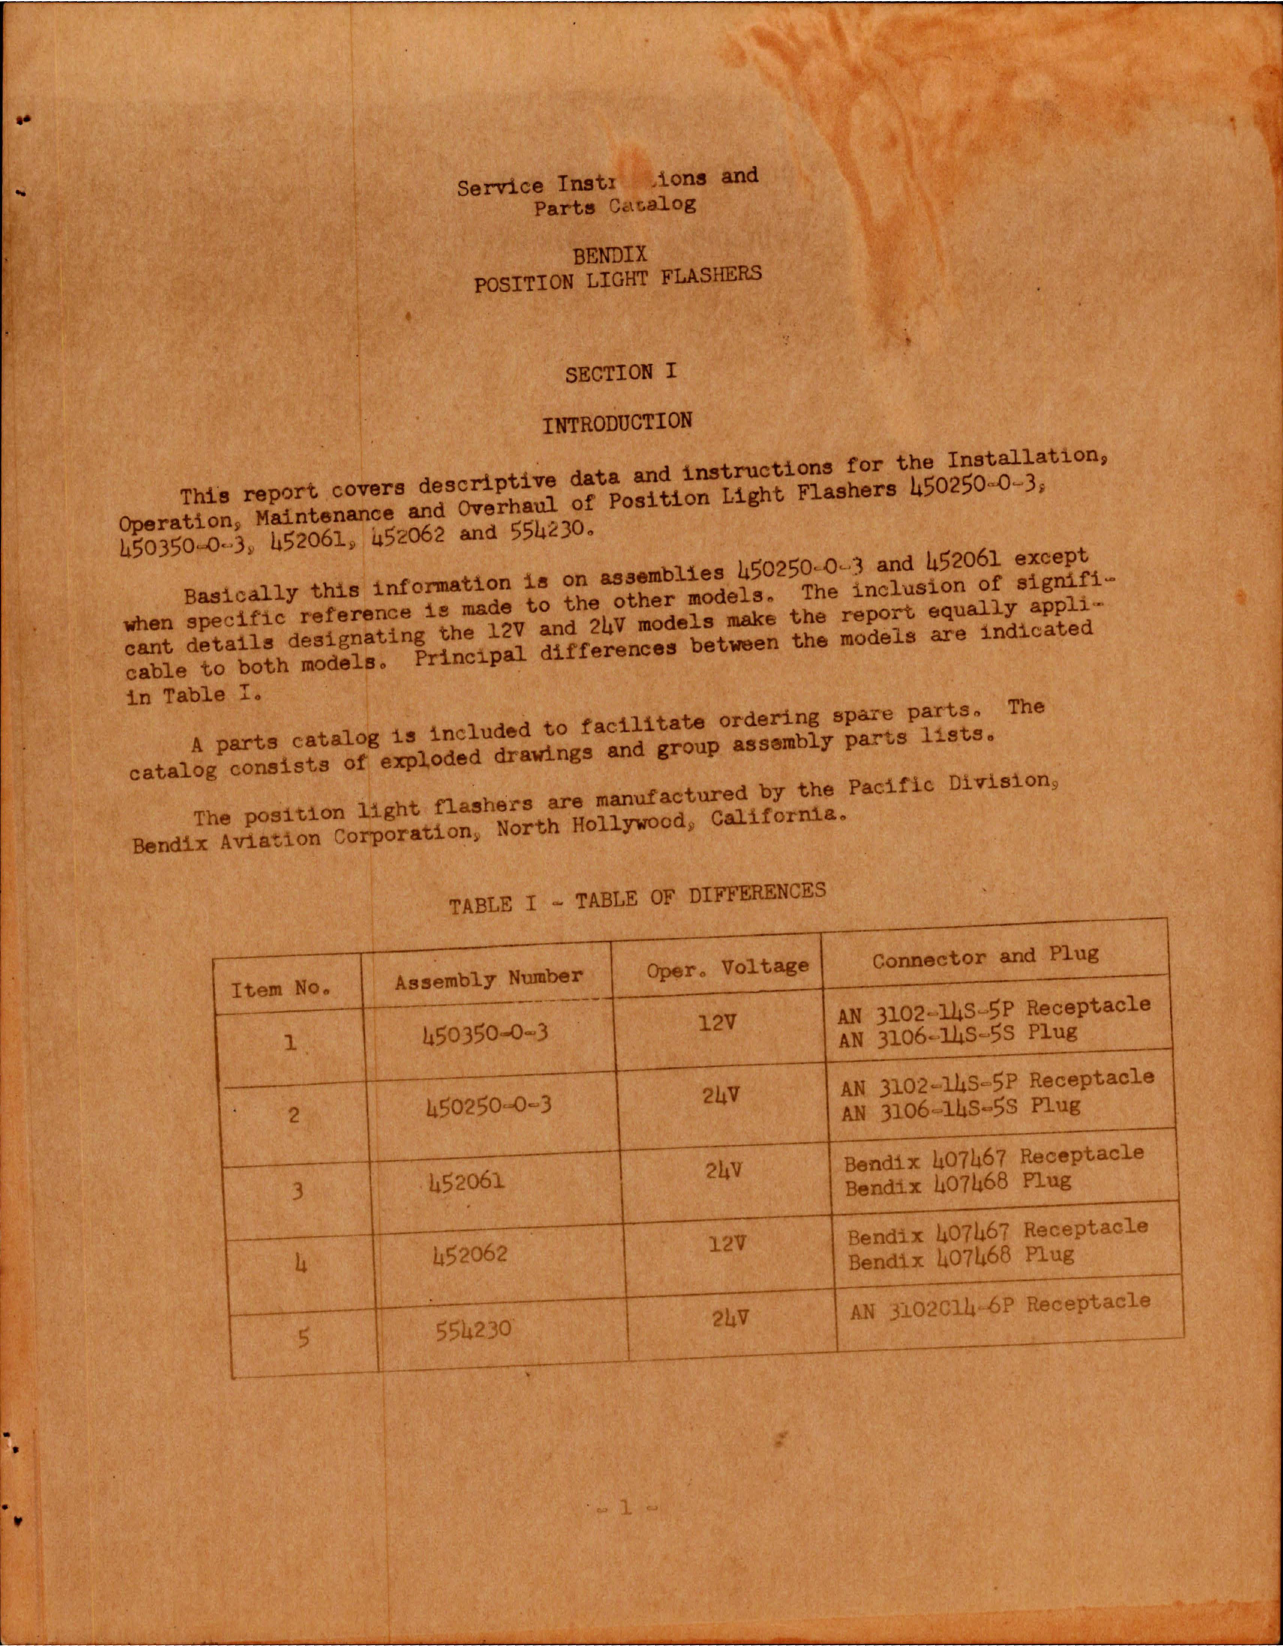 Sample page 9 from AirCorps Library document: Service Instructions with Parts Catalog for Bendix Position Light Flashers